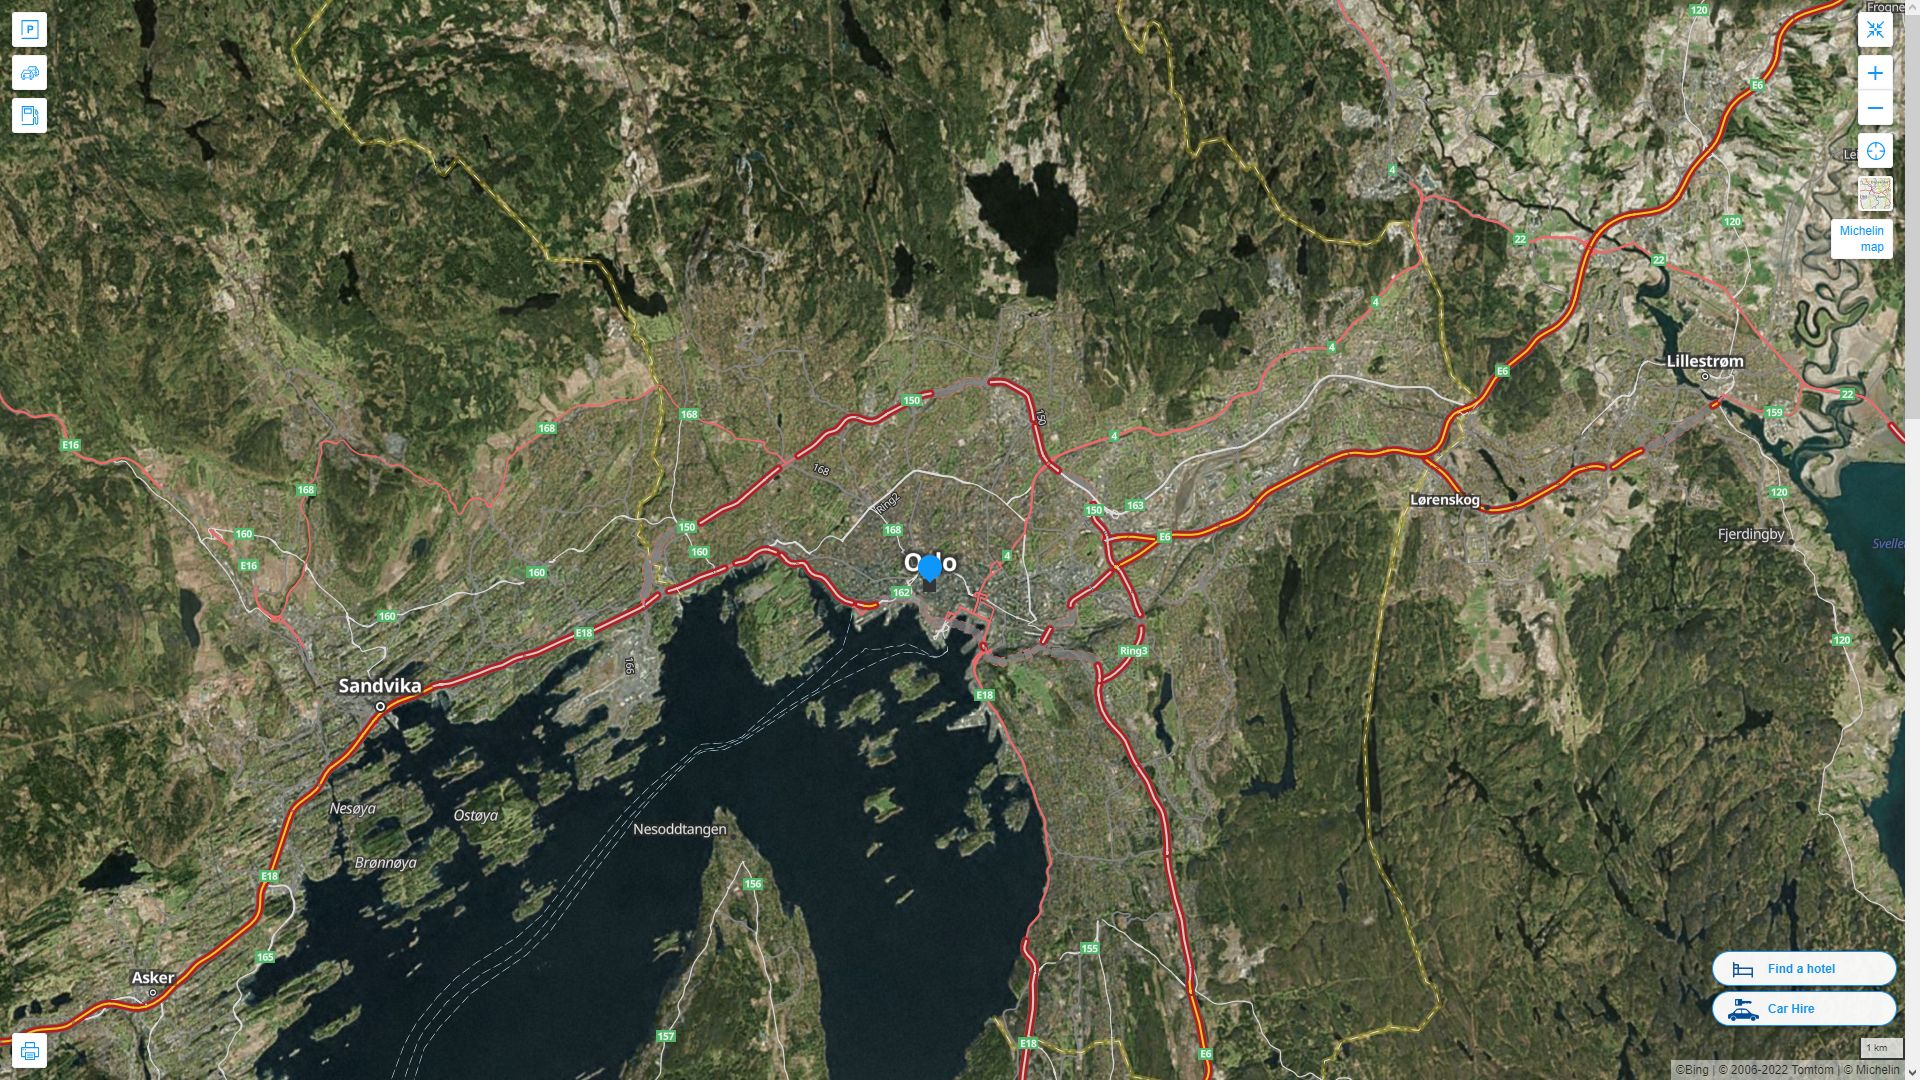 Oslo Highway and Road Map with Satellite View